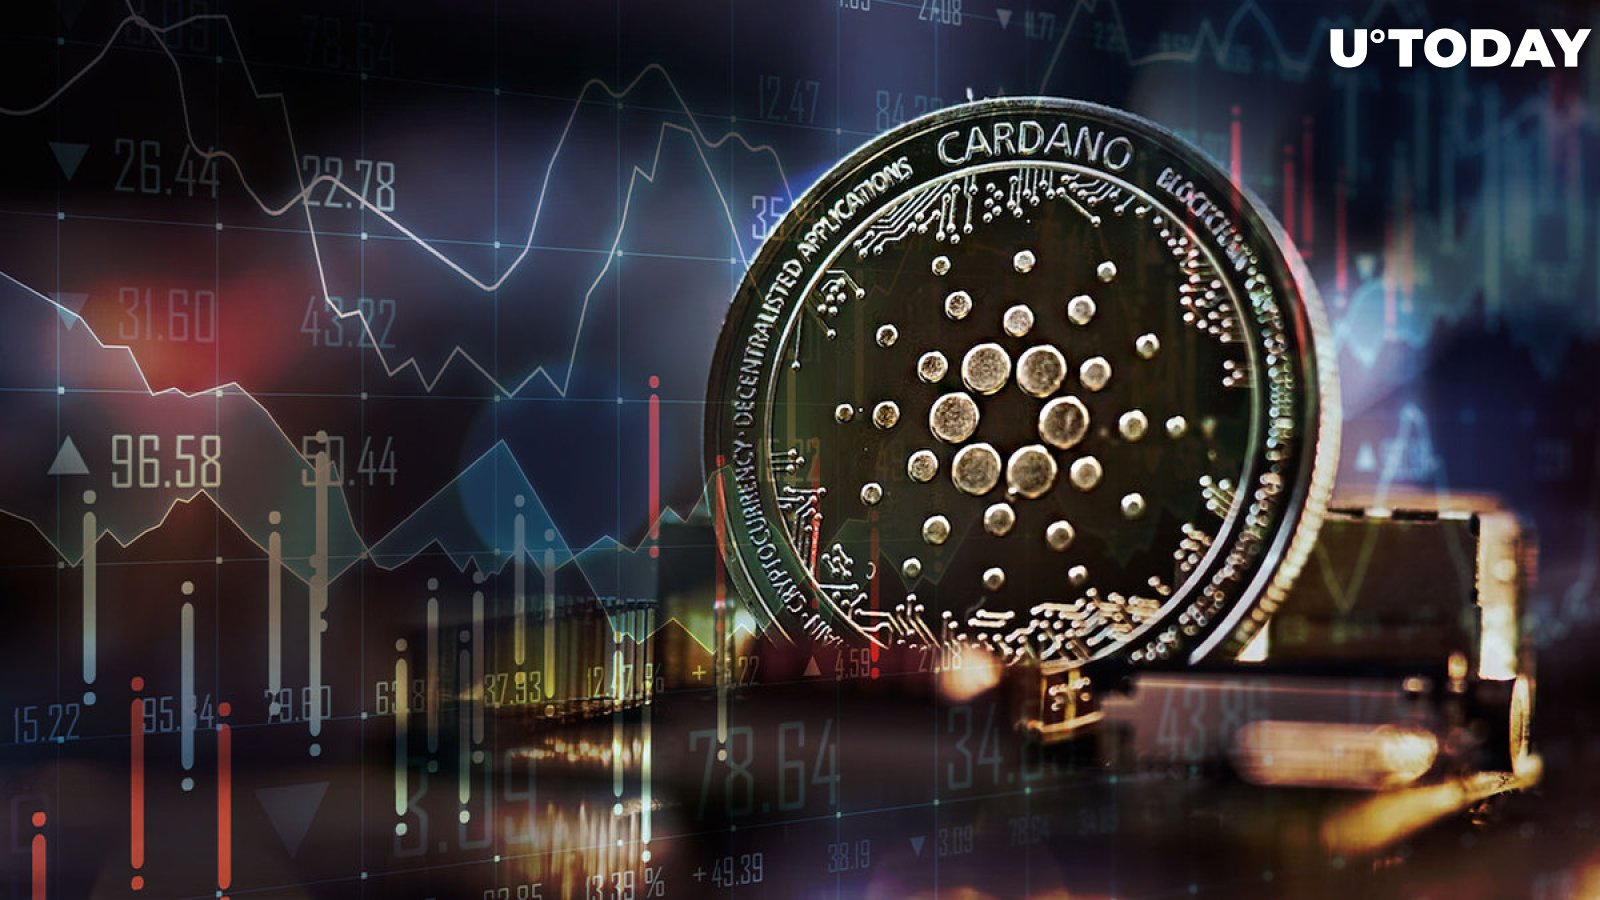 Cardano Transaction Count Spikes to 75,000 with More to Come